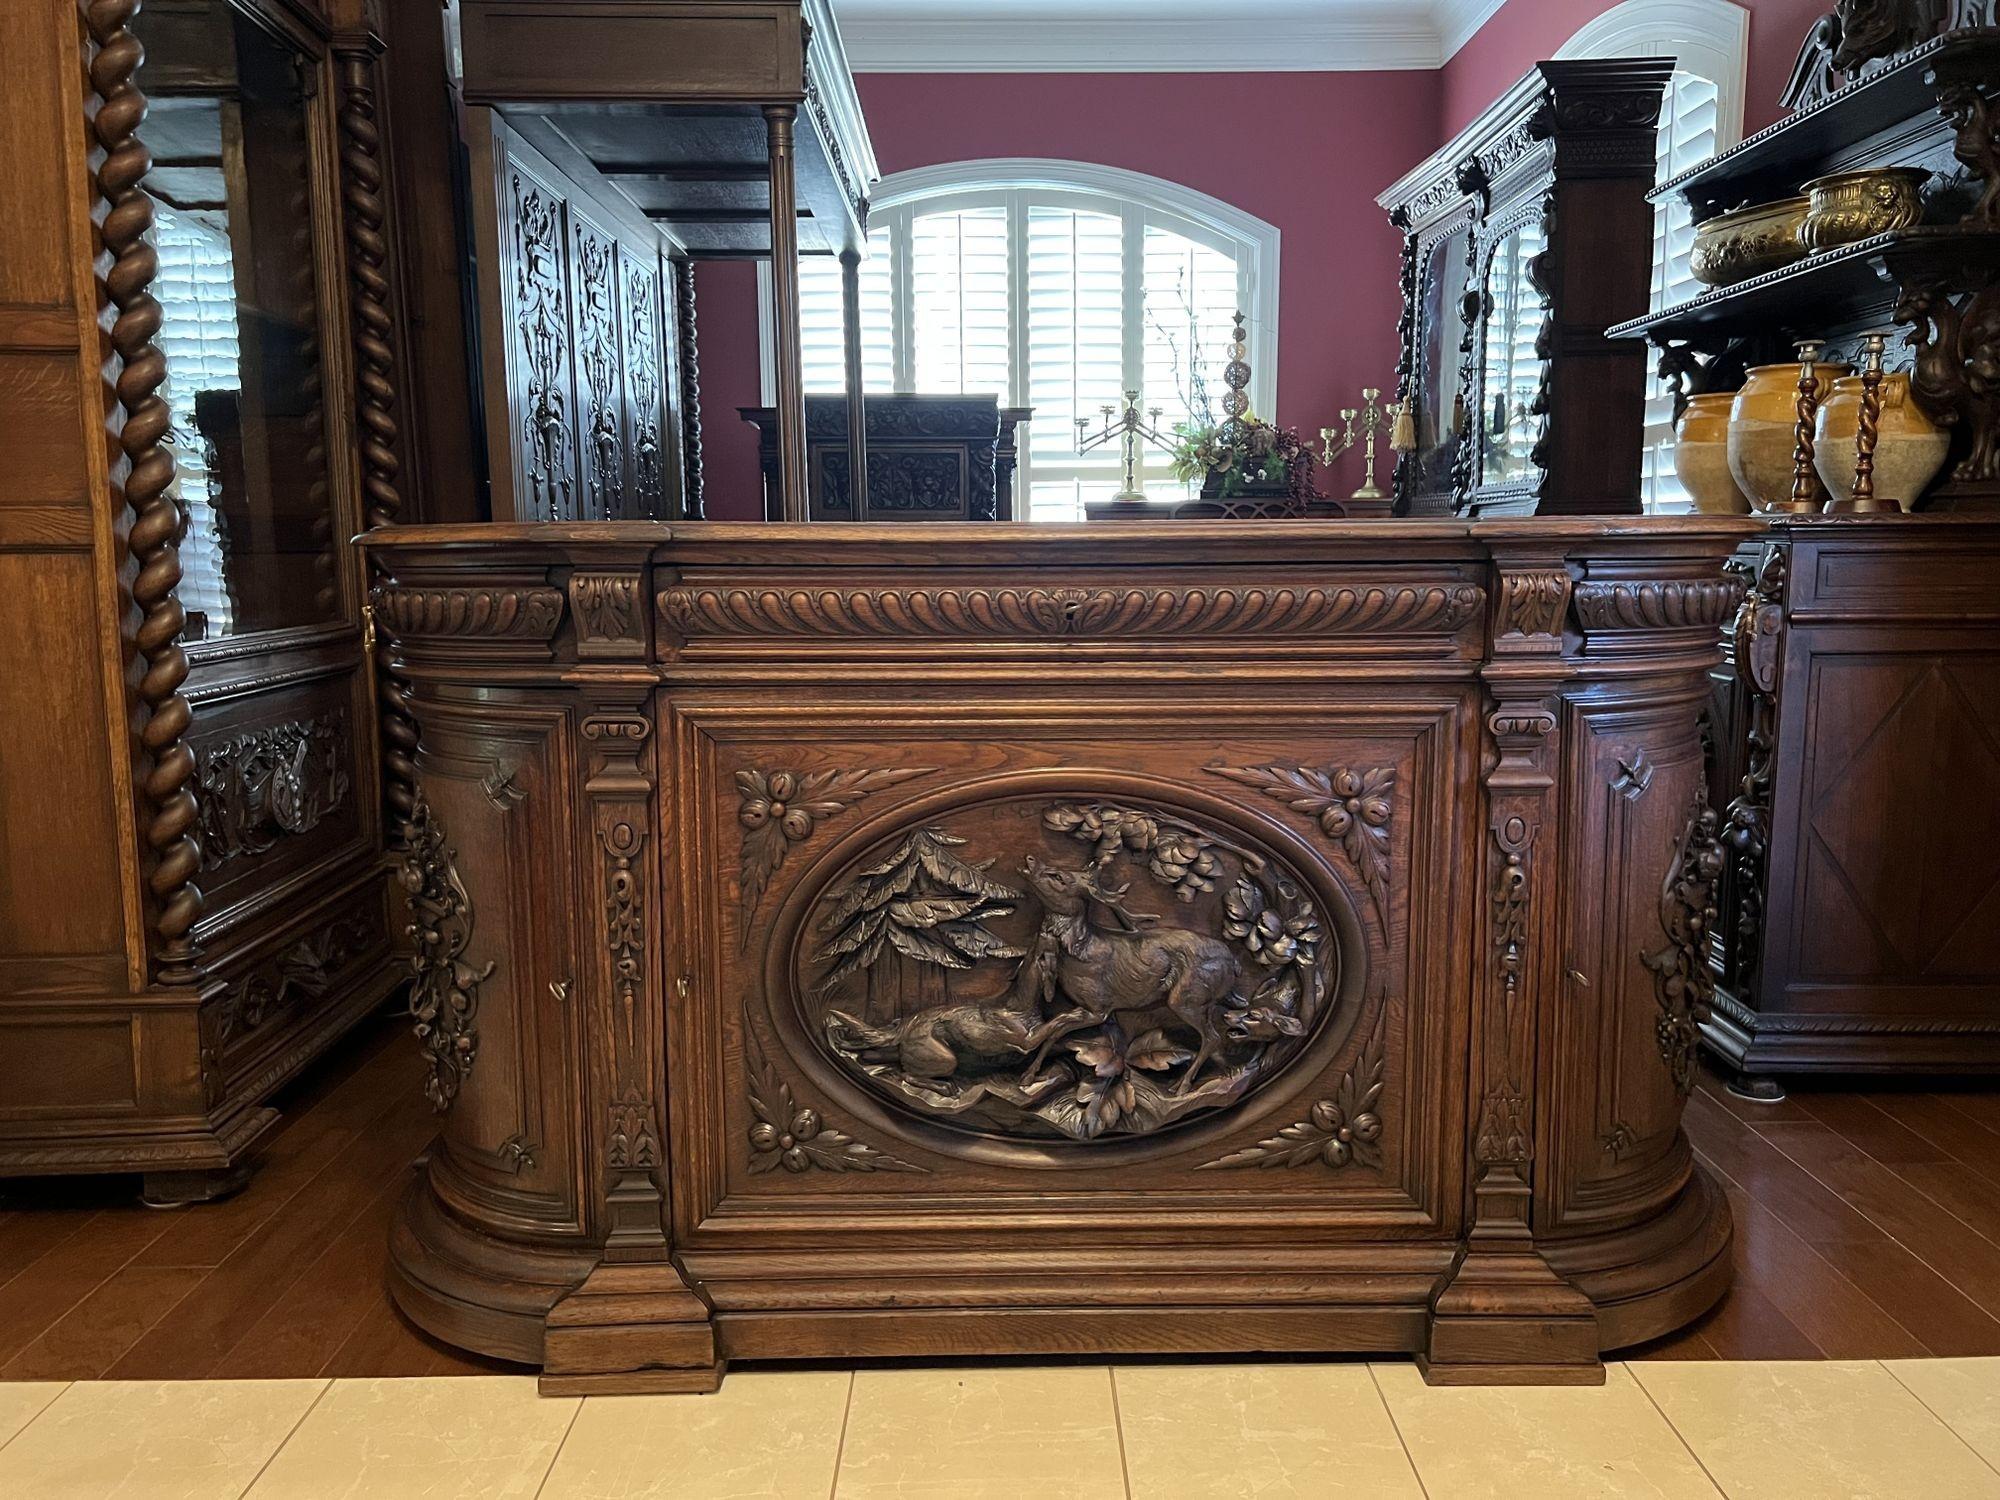 19th century French sideboard server buffet hunt cabinet black forest stag hound.

Direct from a castle estate in France, a large 19th century carved French sideboard hunt cabinet! We recently purchased the entire contents of a gorgeous French